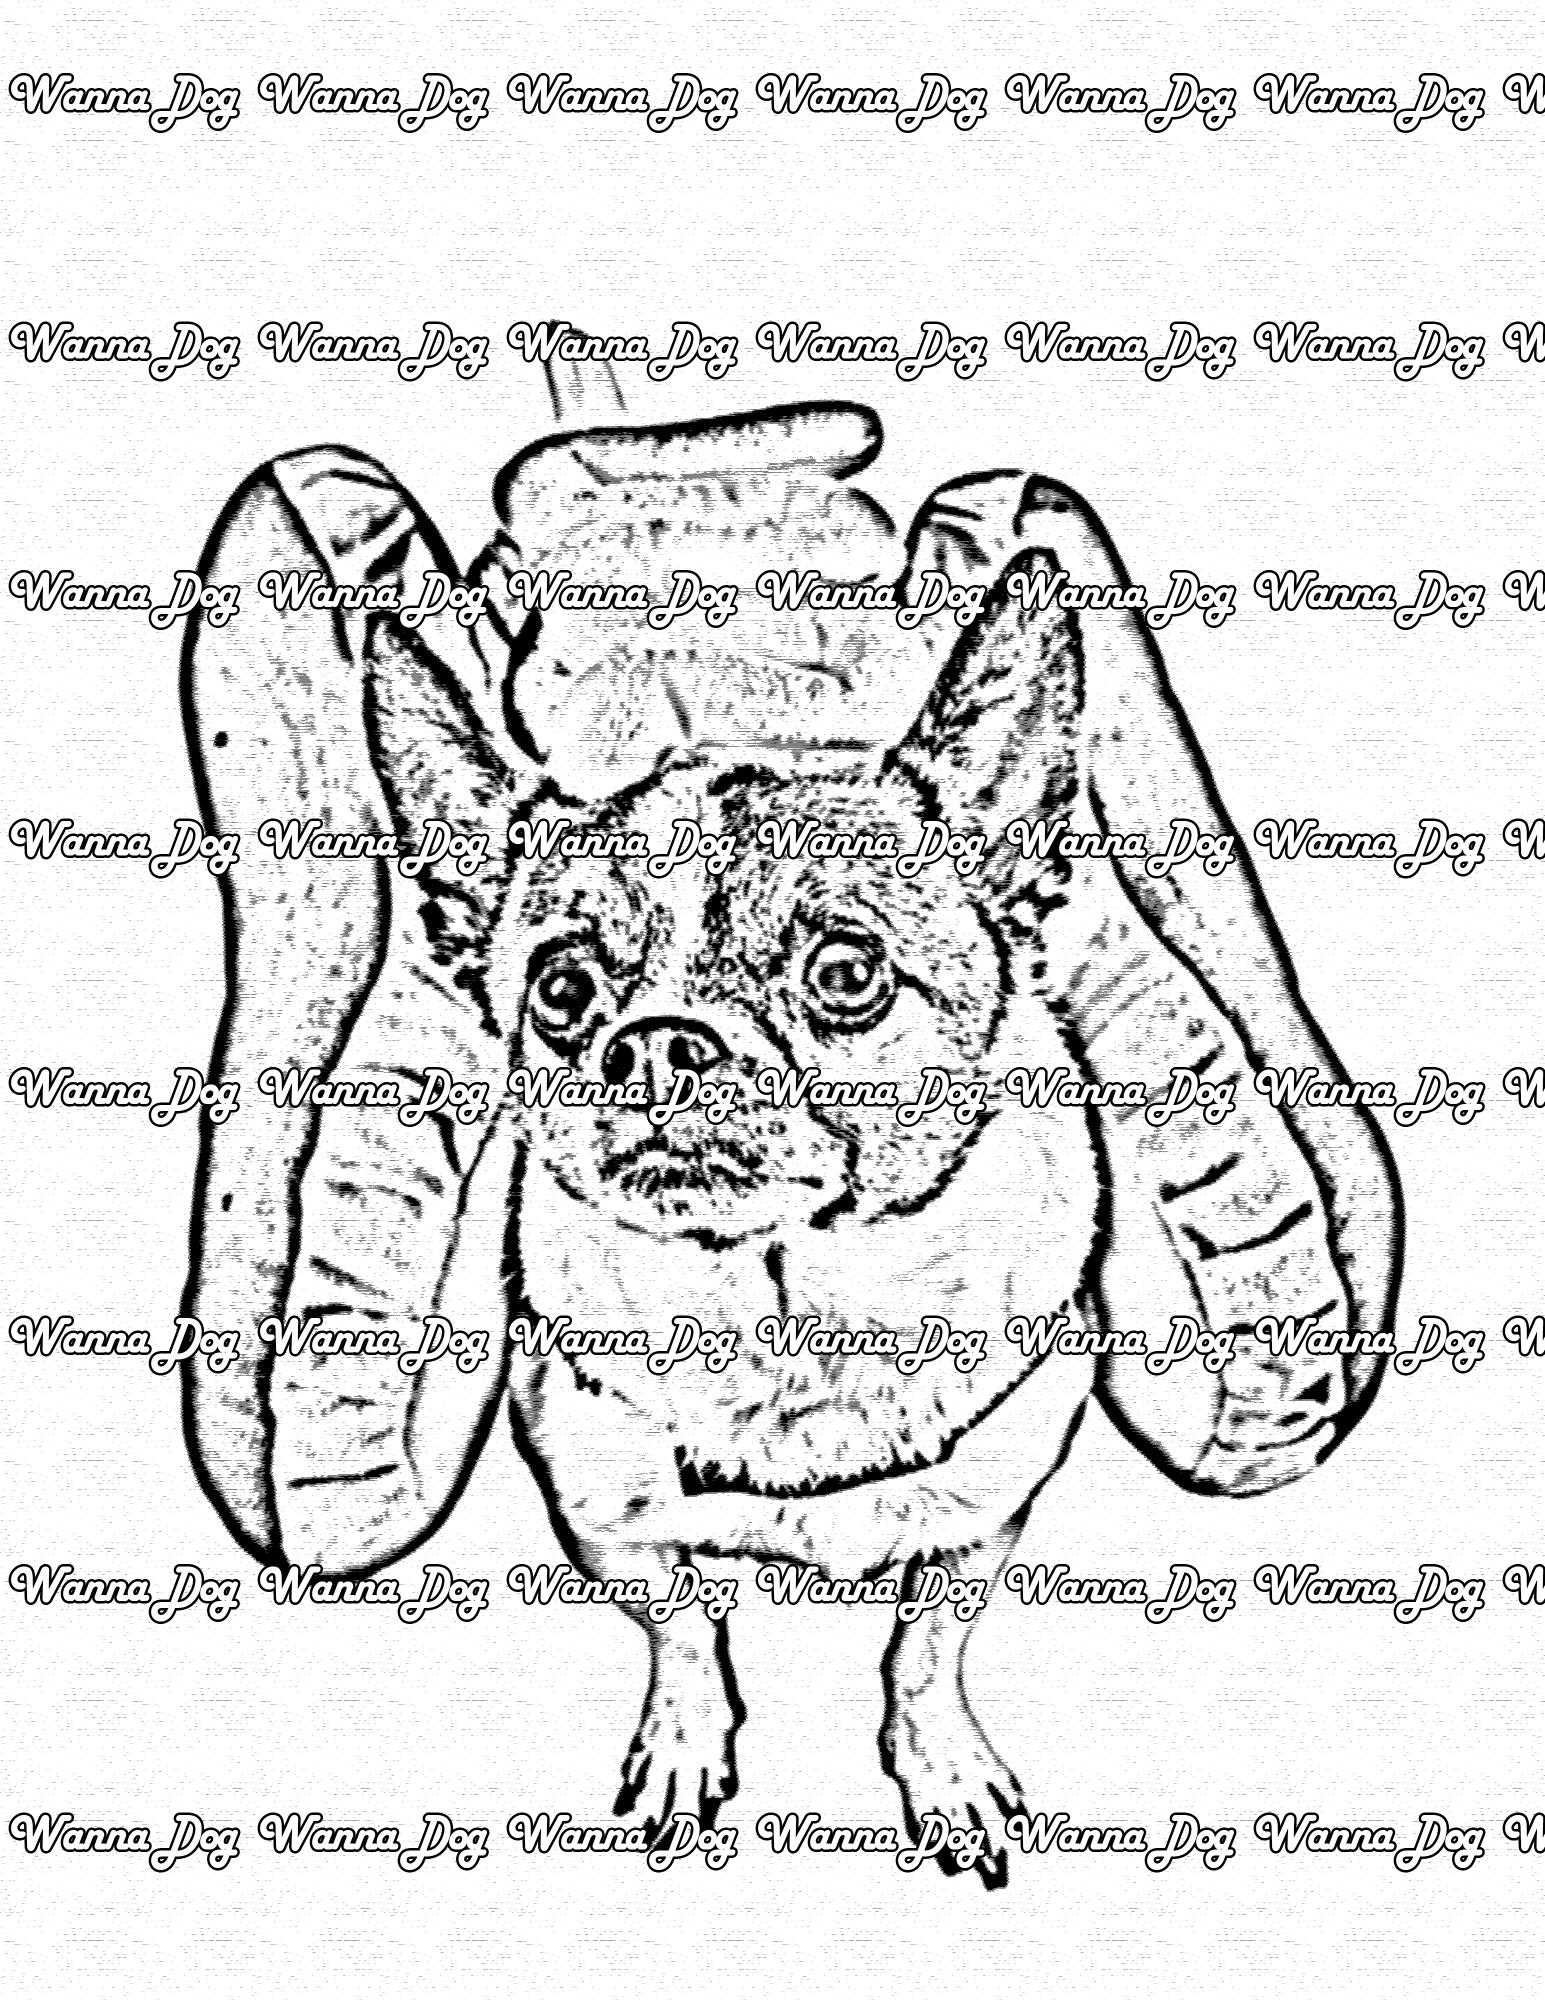 Halloween Dog Coloring Page of a Dog in a hot dog costume